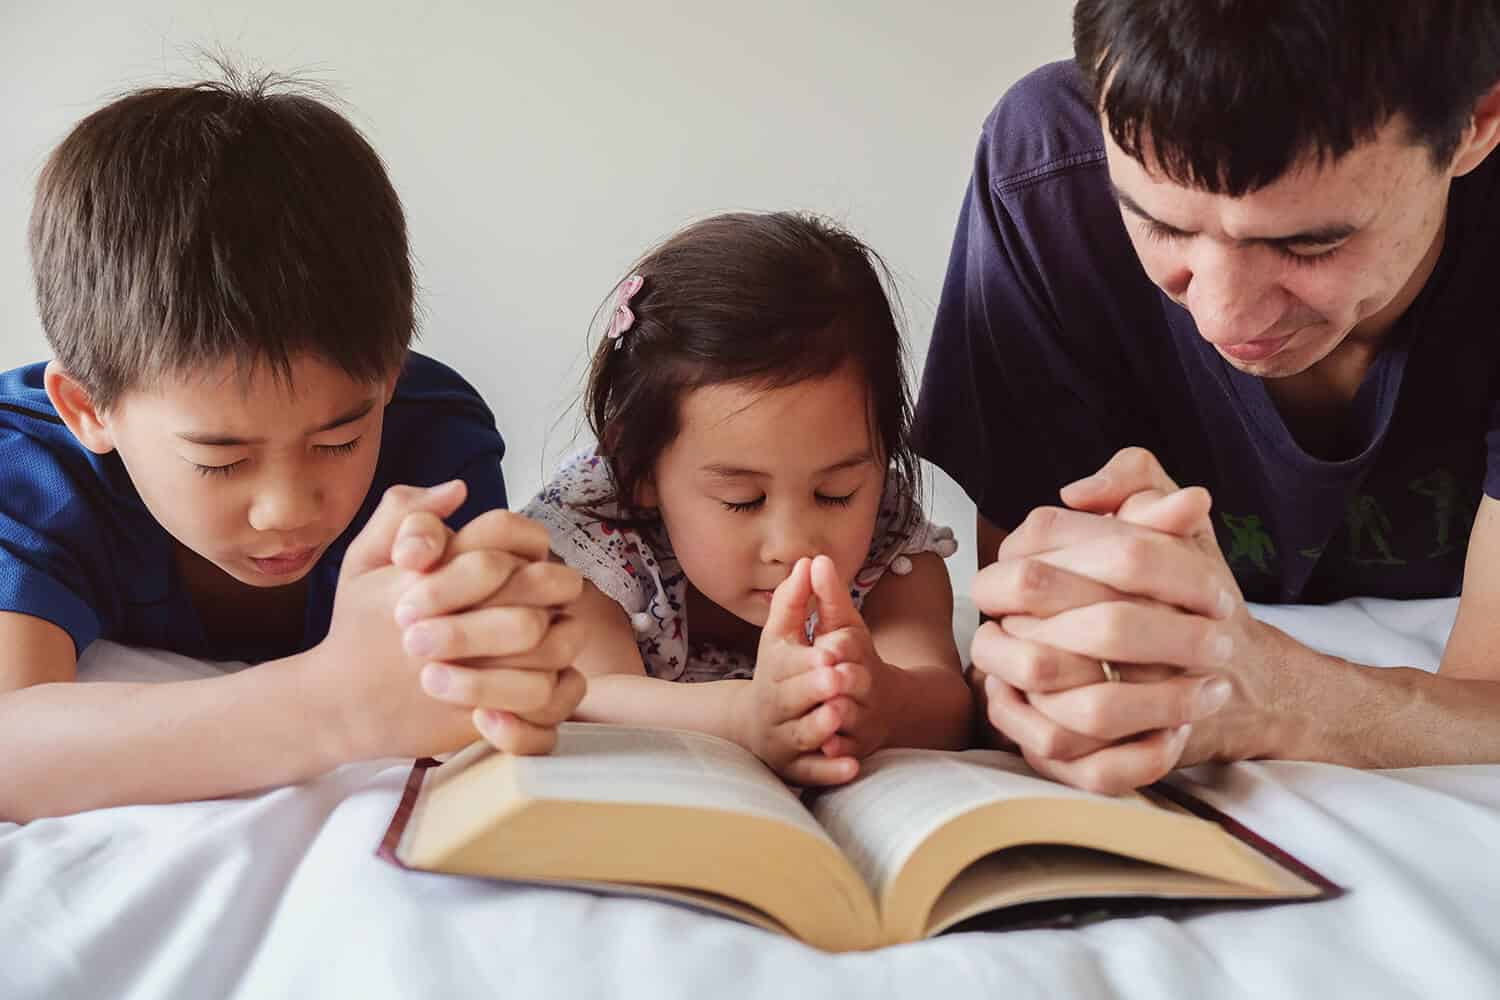 60 Effective Prayers For Children To Keep Them In God's Care